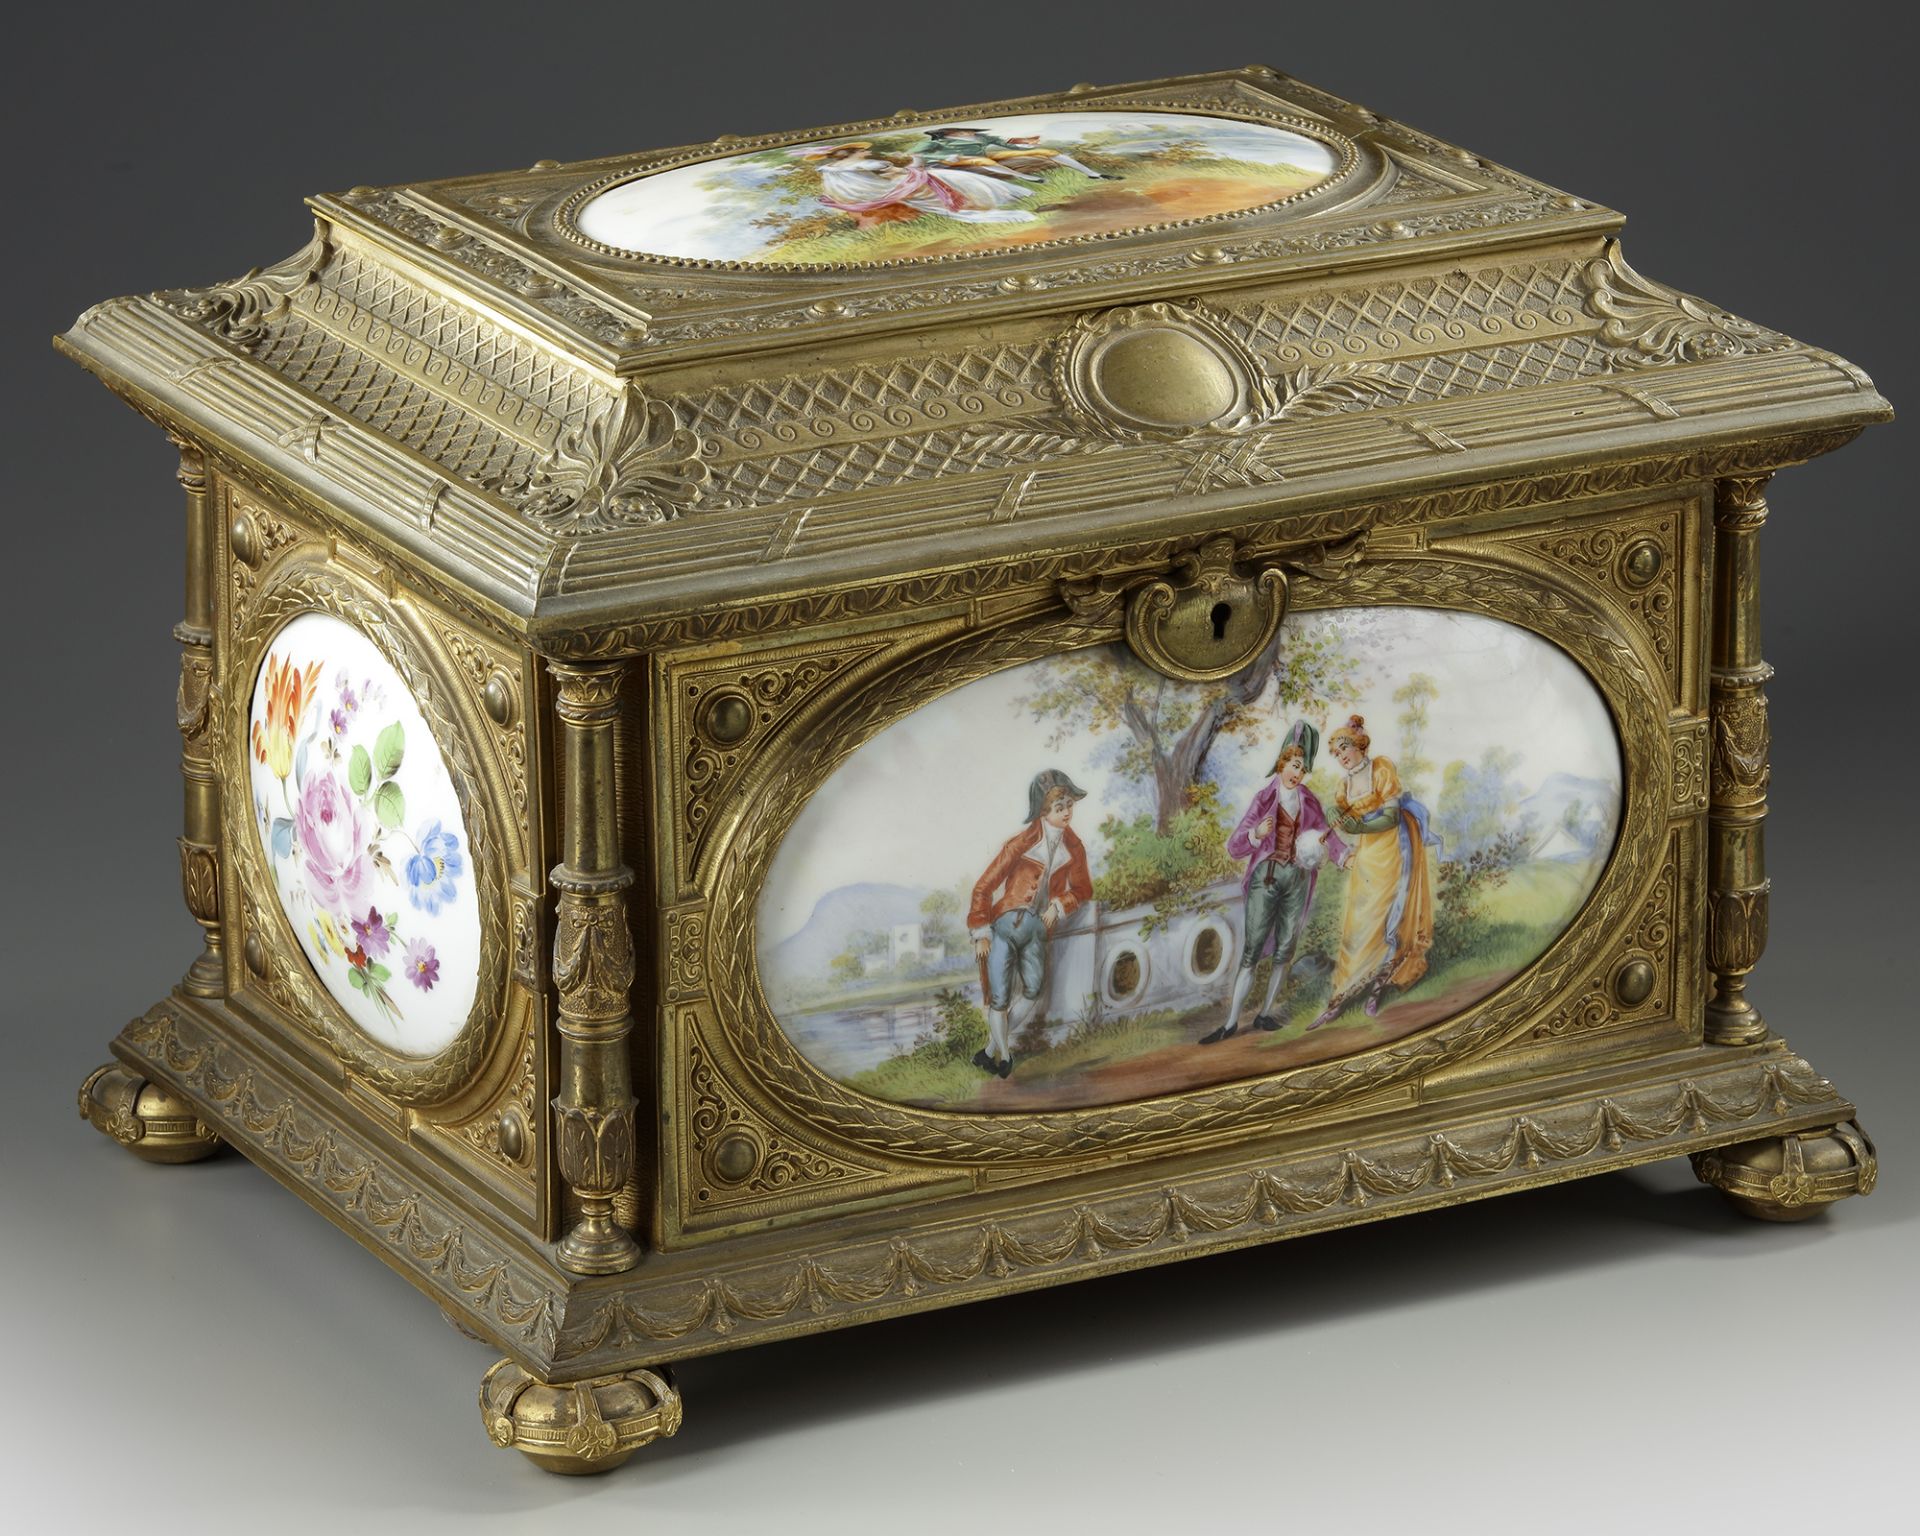 A LARGE JEWELRY BOX, SEVRES PORCELAIN, 19TH CENTURY - Image 3 of 5